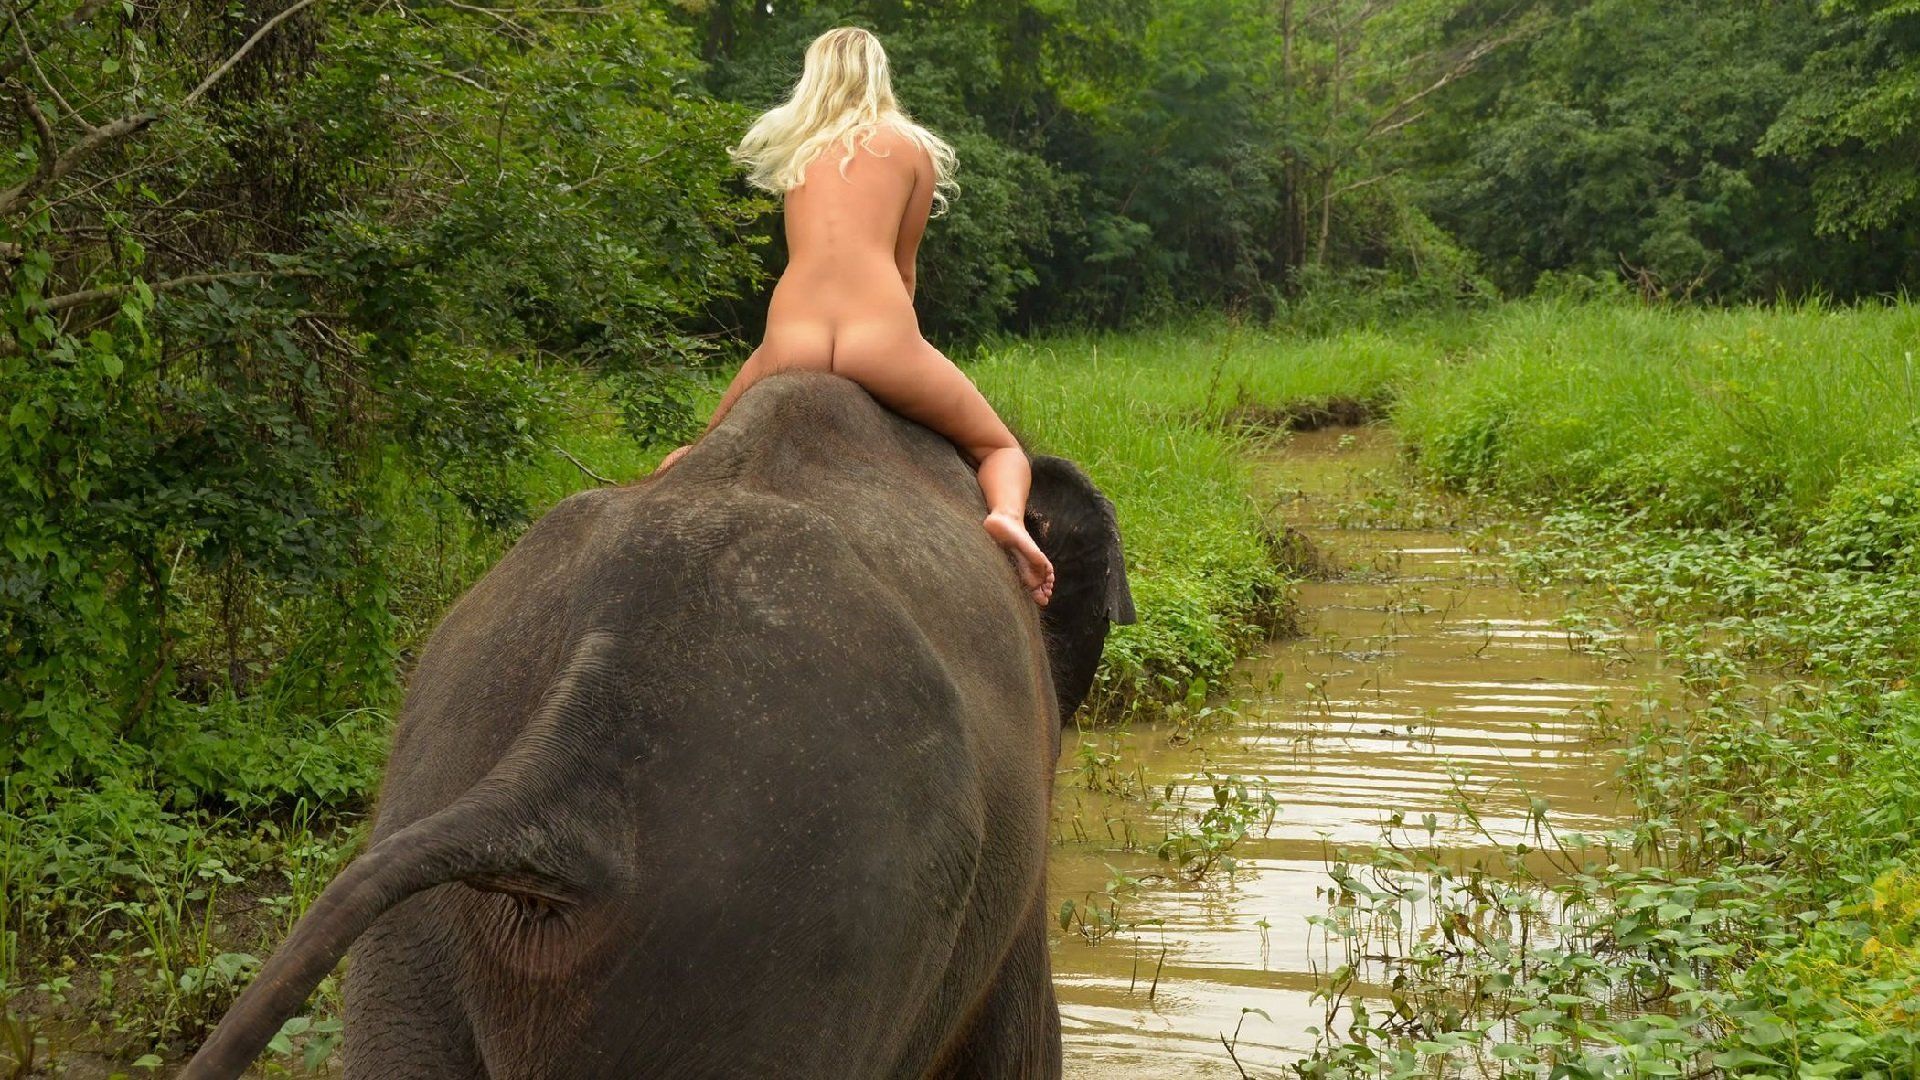 Sexy Girl And Elephant ❤️ Best adult photos at thesexy.es picture image